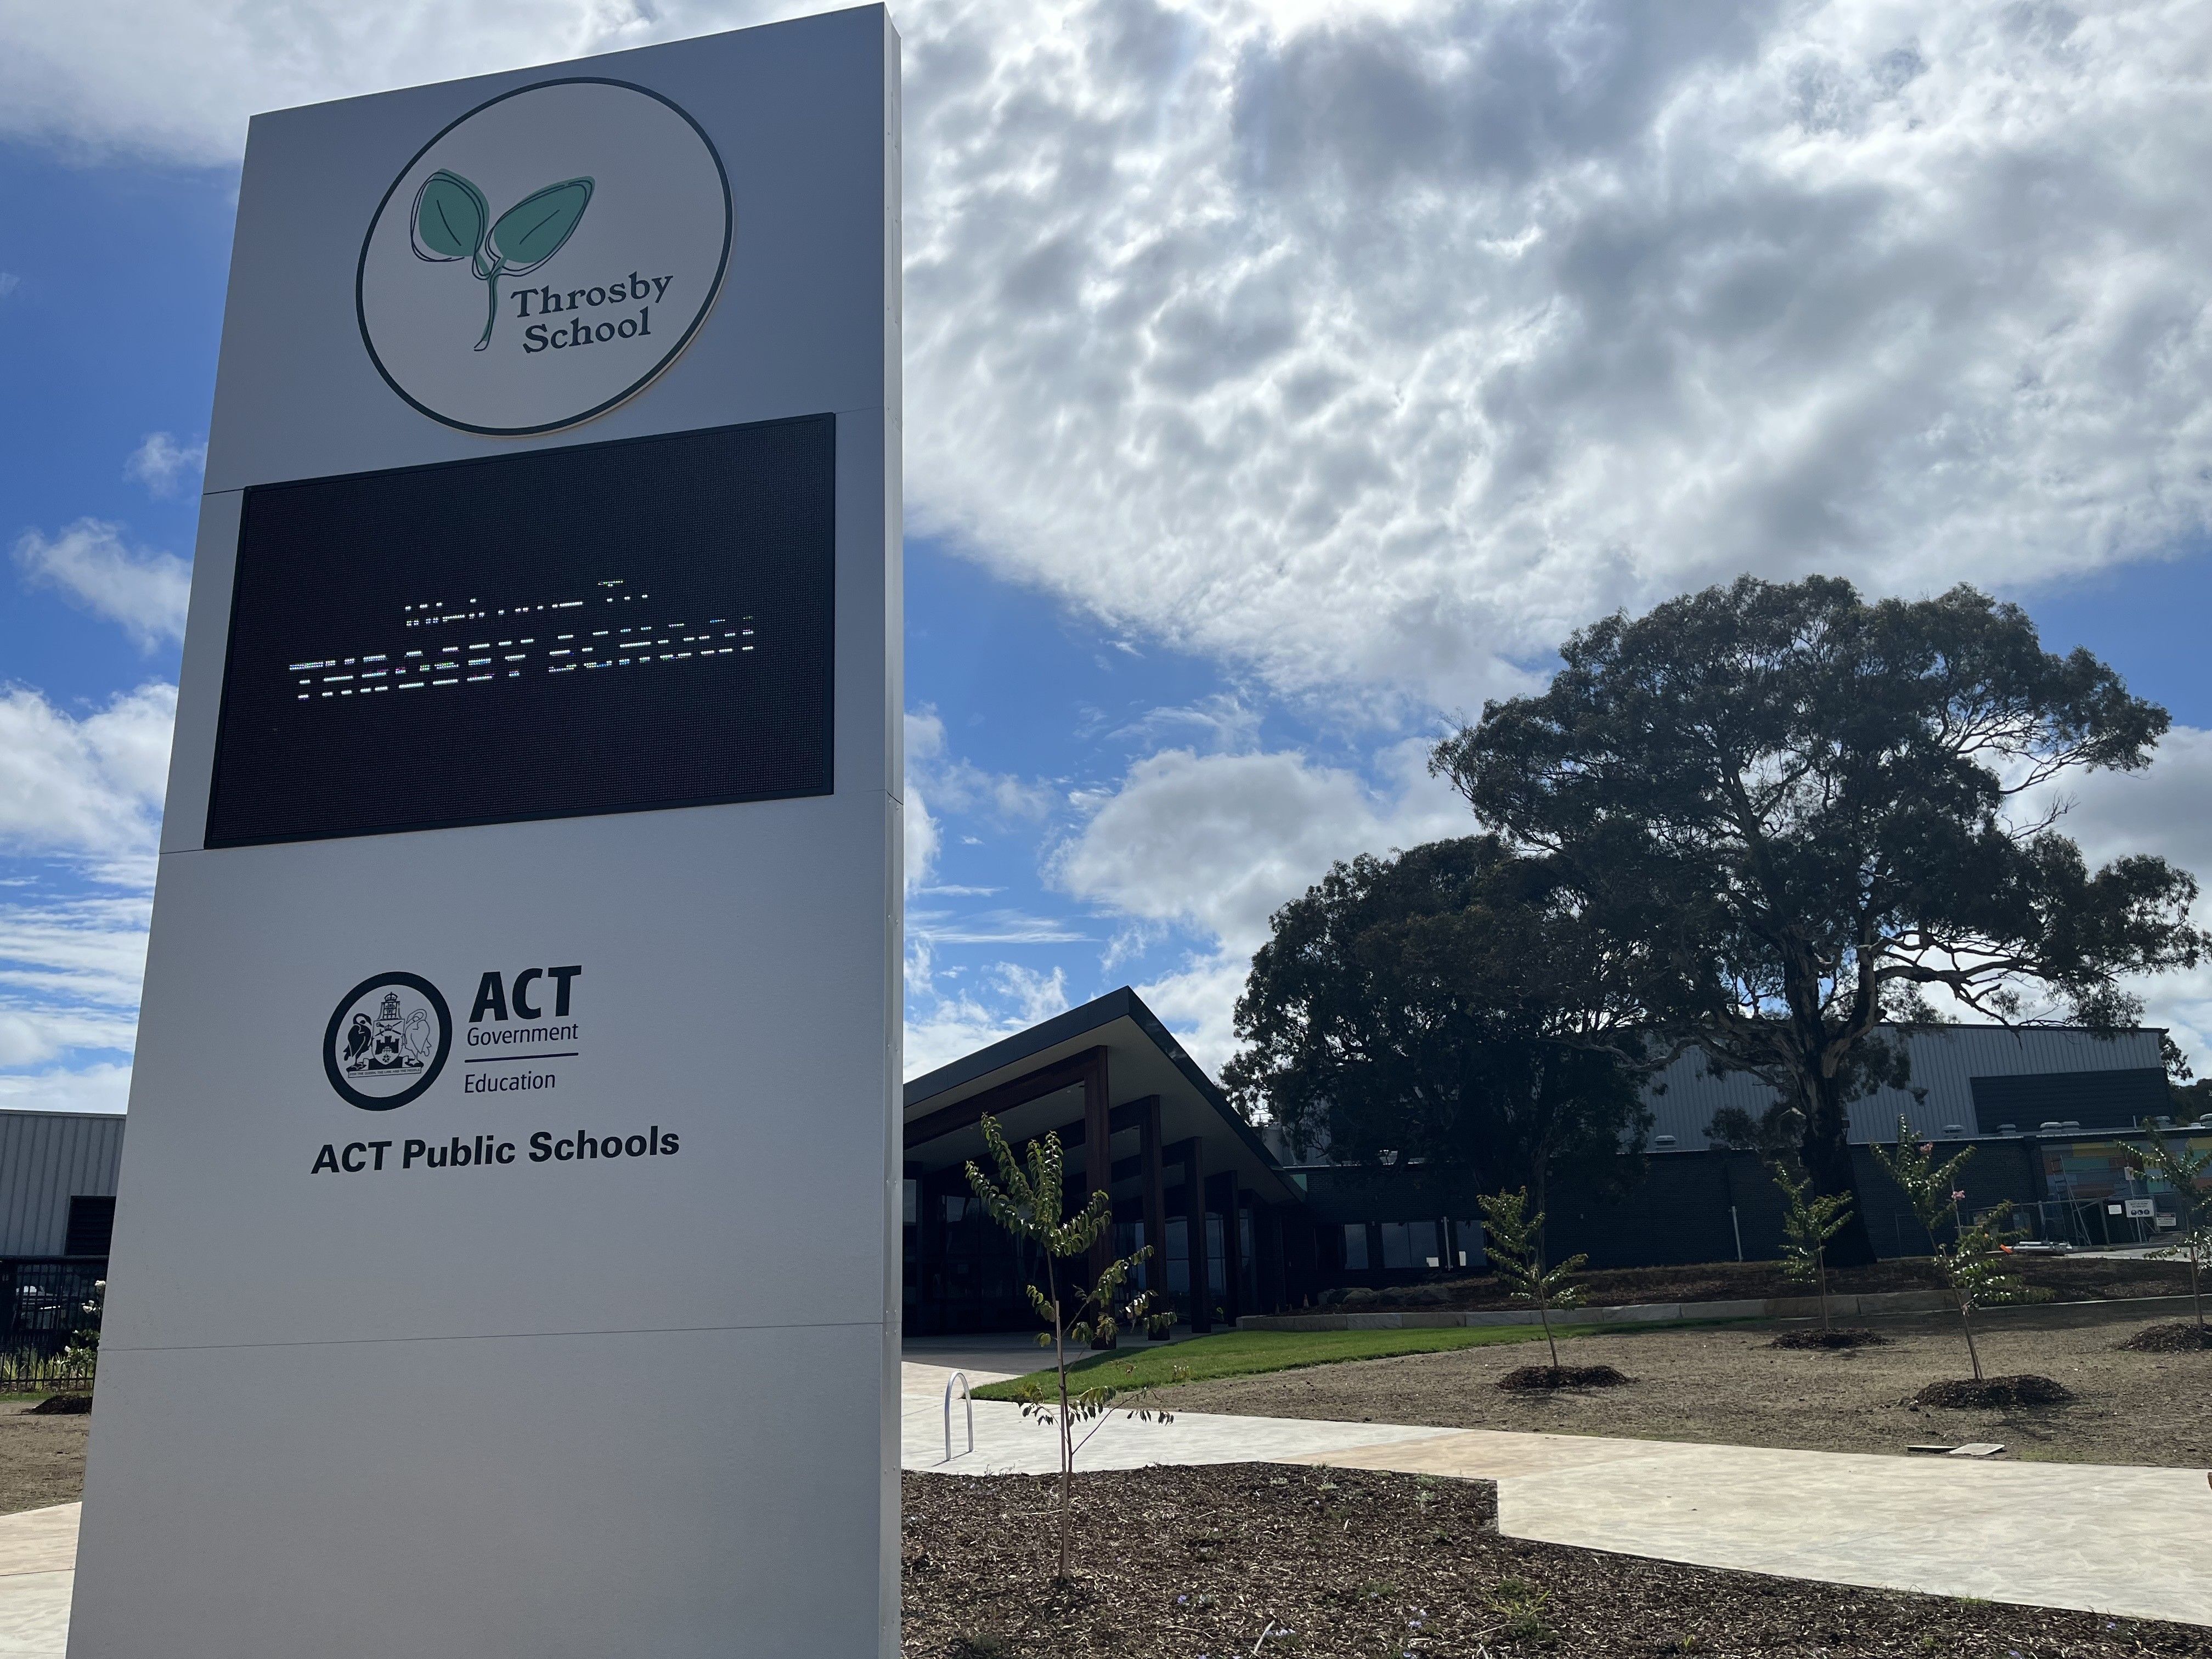 Canberra's newest school prepares to welcome students for Term 1